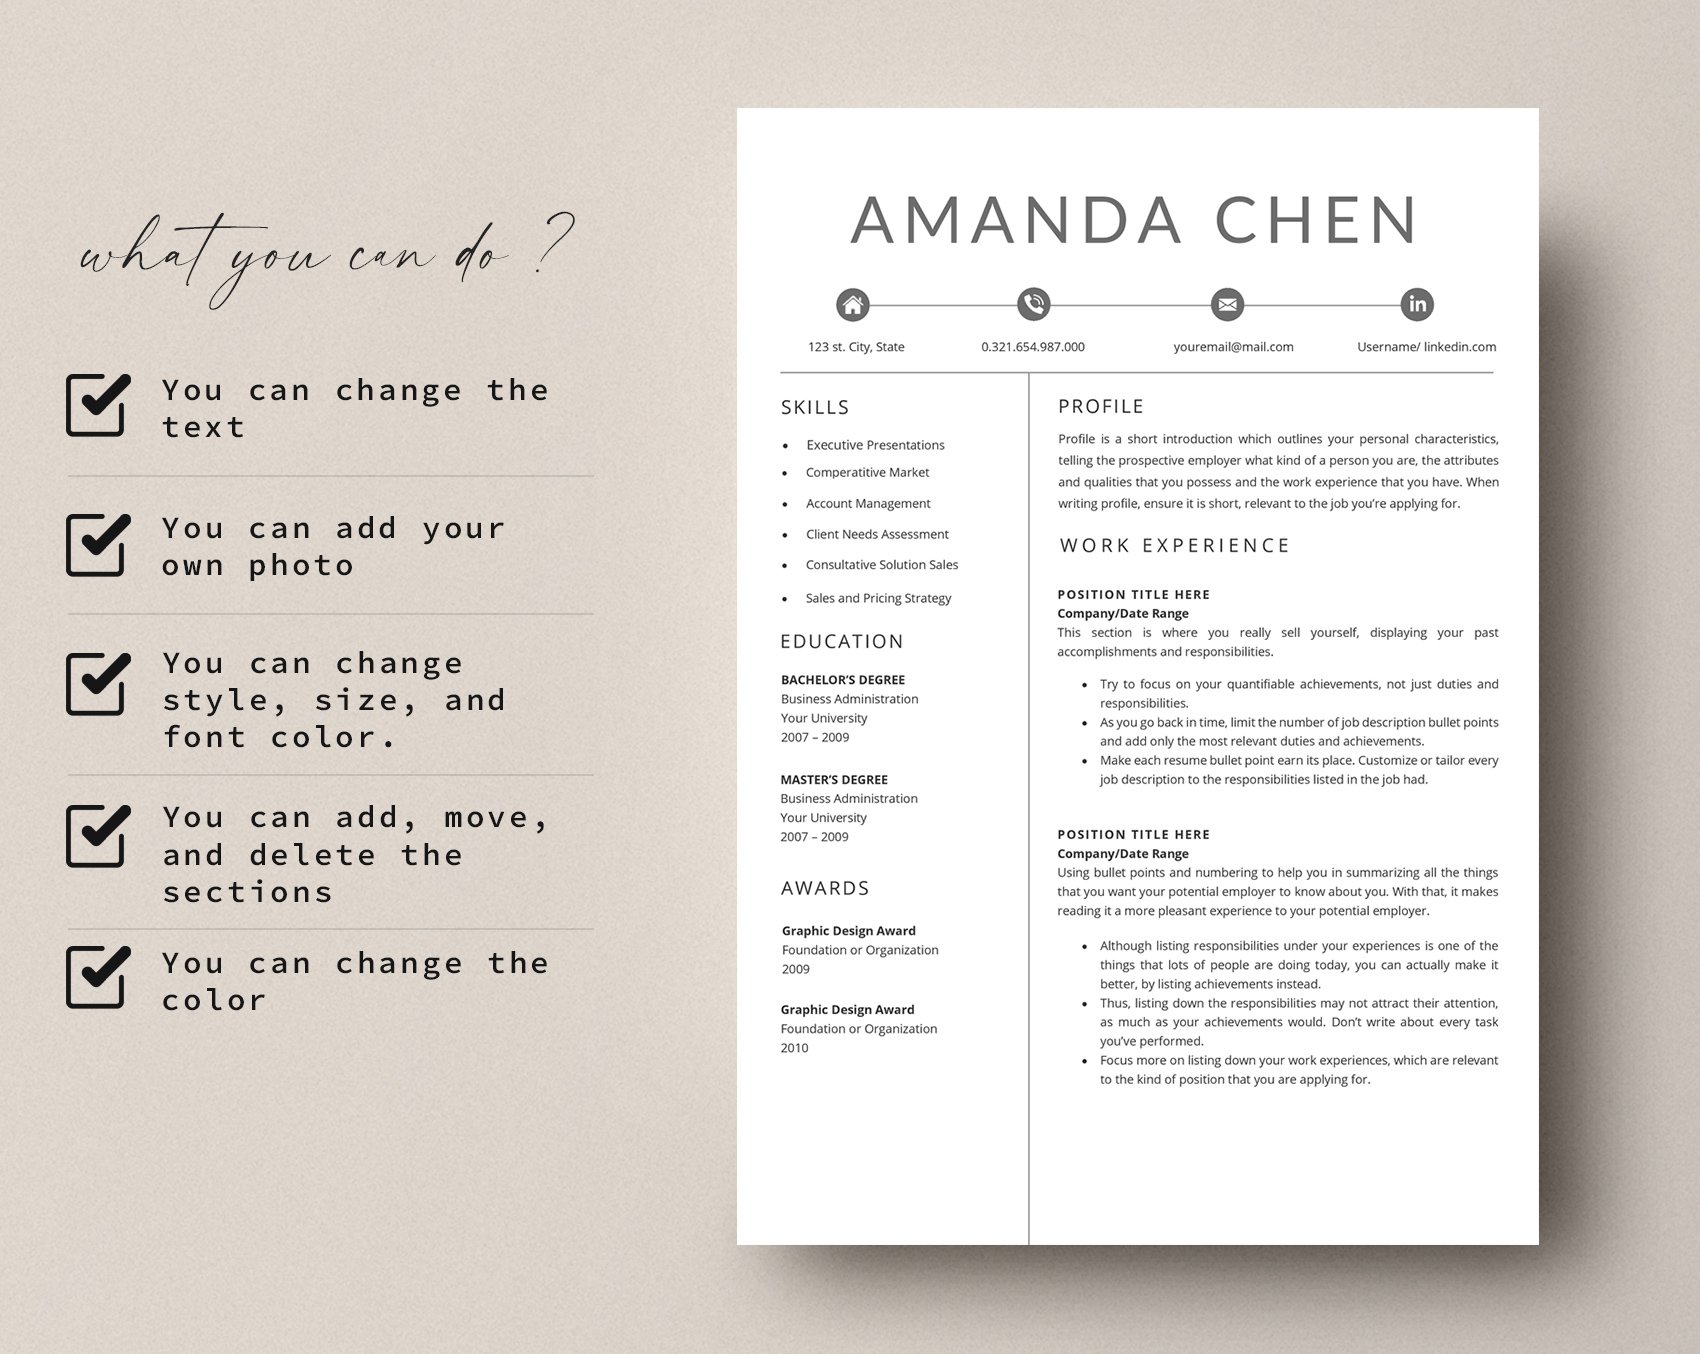 MS. Word - Resume Template 4 Pages preview image.